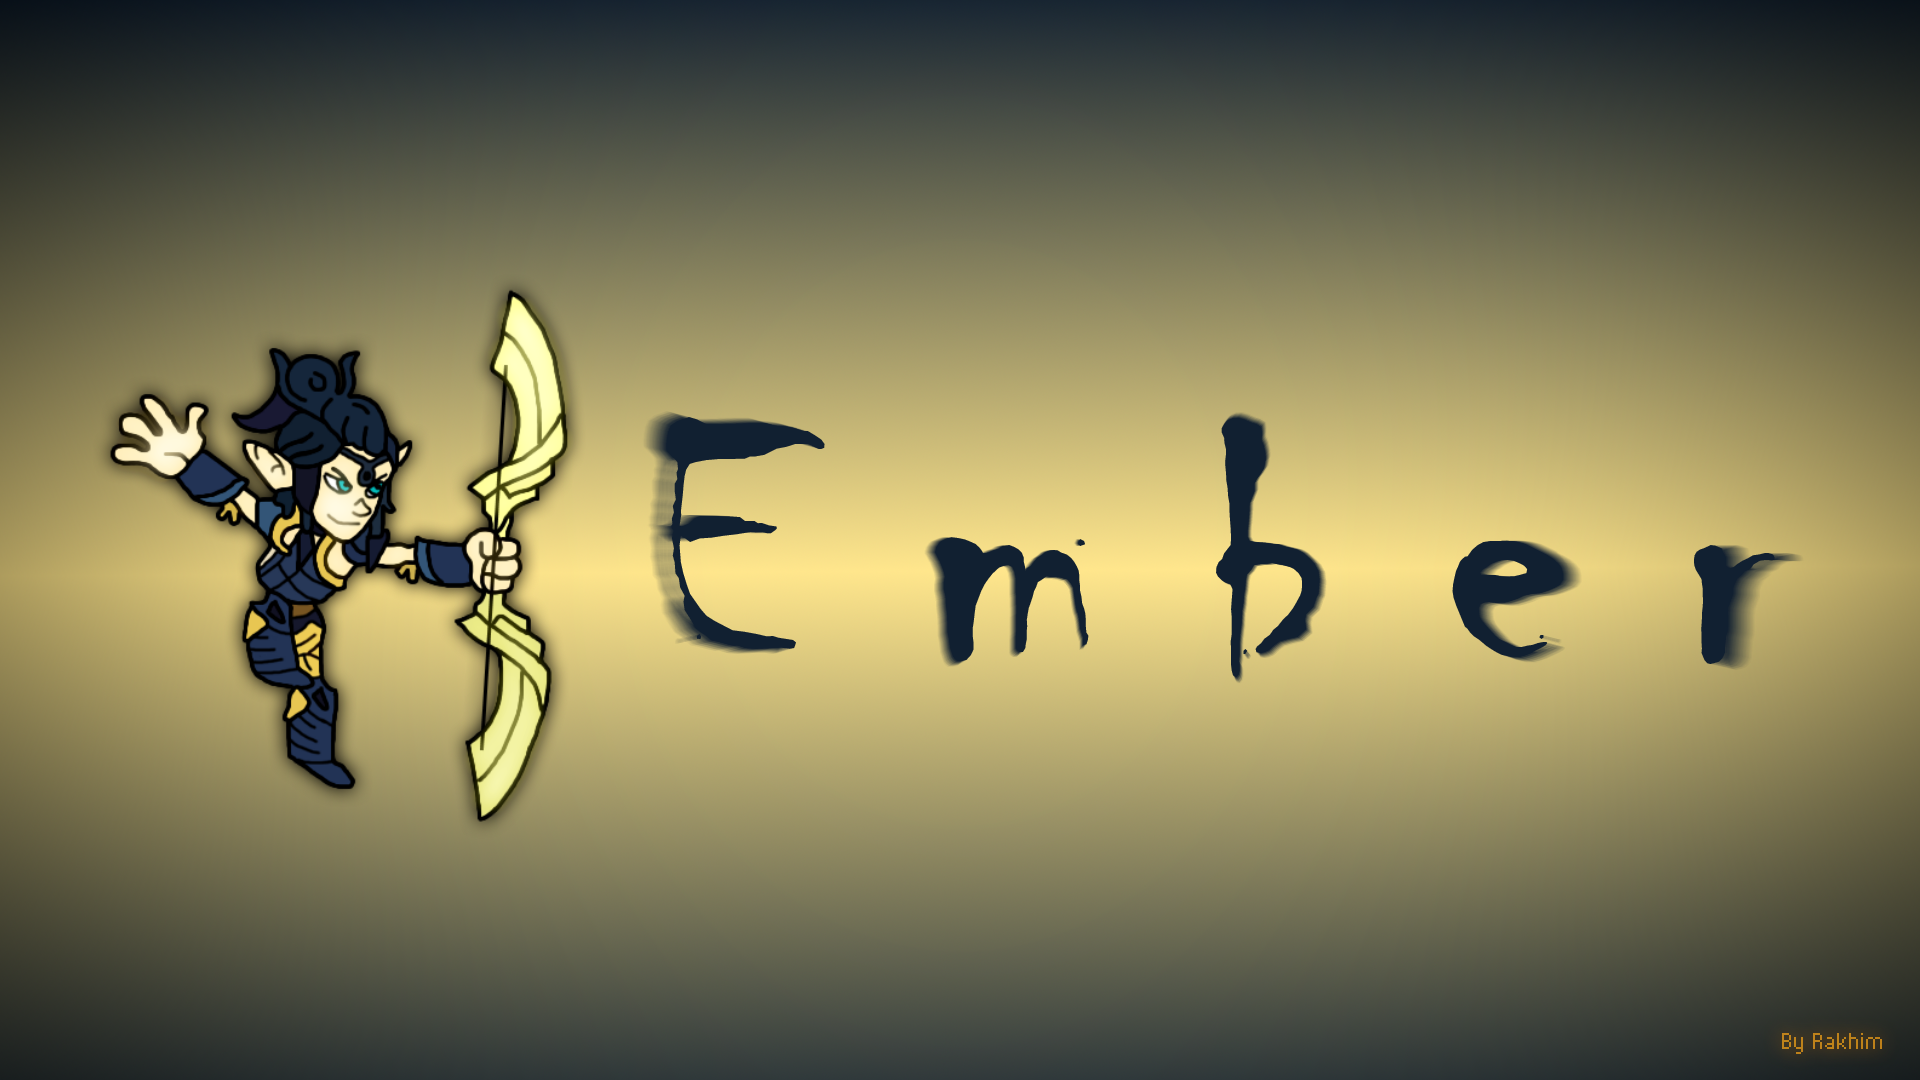 An Ember wallpaper i made for a friend <3: Brawlhalla